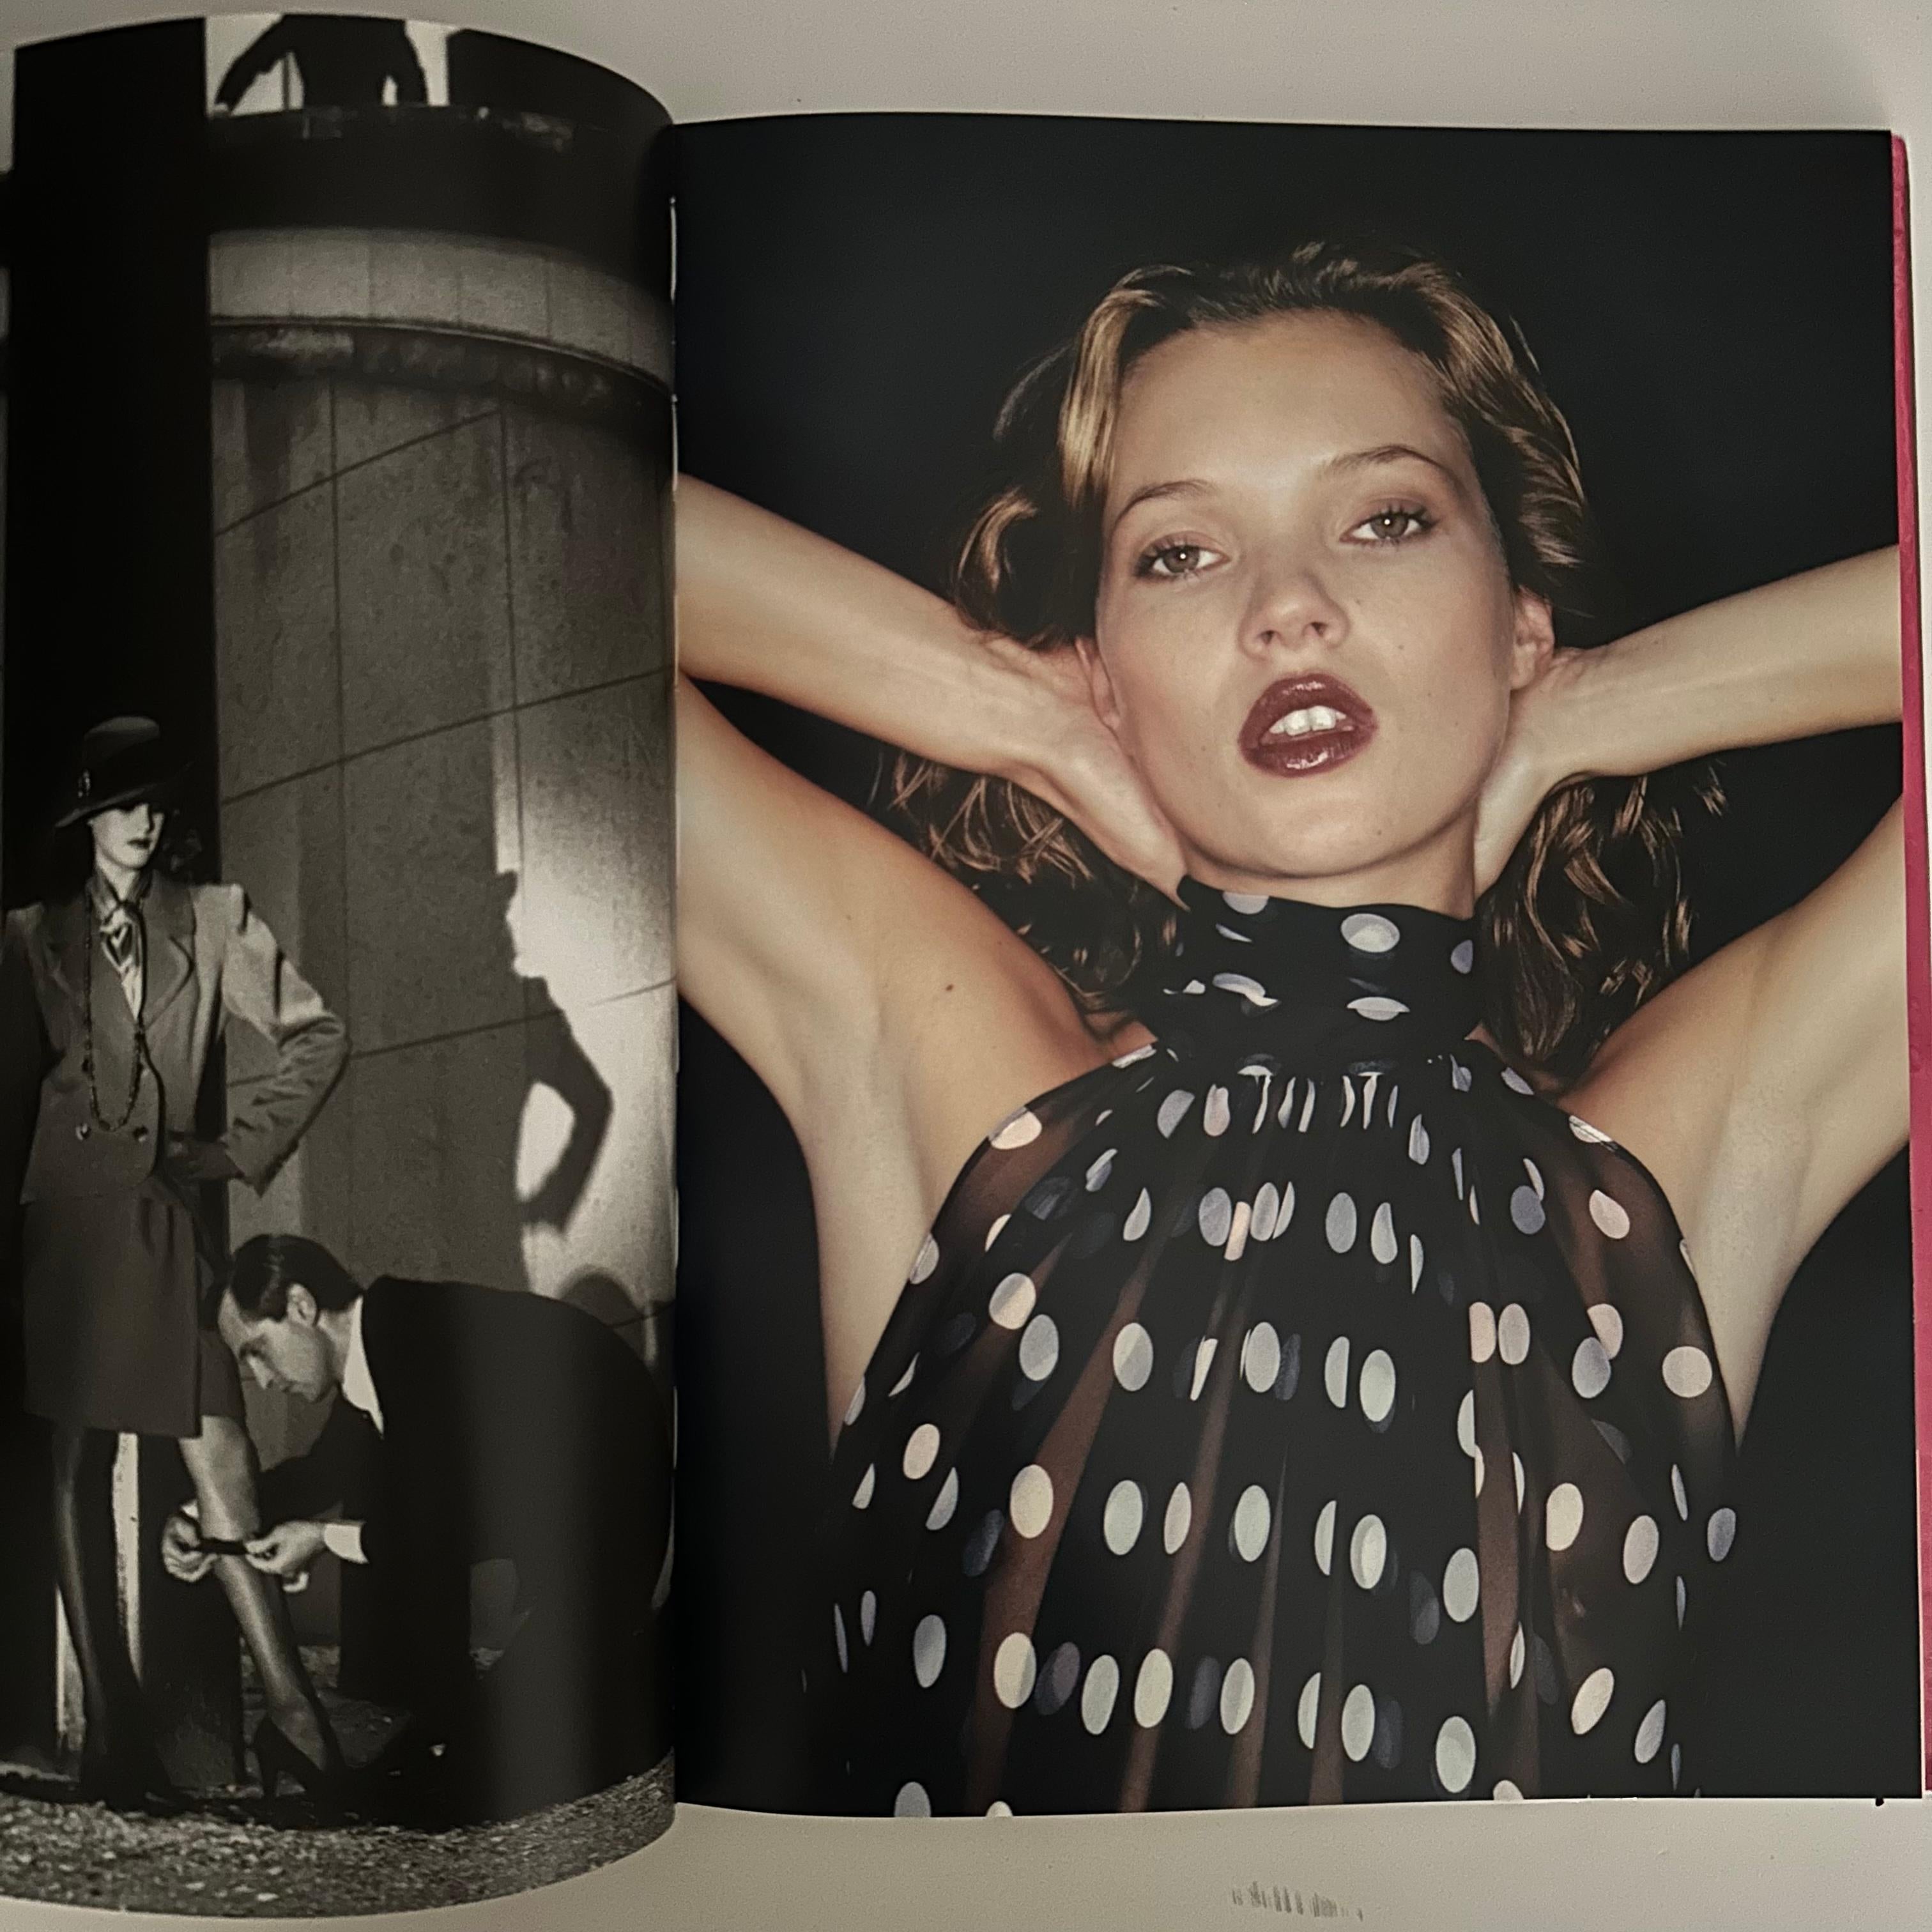 Published by IFFP - International Festival of Fashion Photography 1st edition 1998 Hardback English and French text.

This gorgeous book is published accompanying an anniversary exhibition by the IFFP. This book includes fifty-one lush photographs